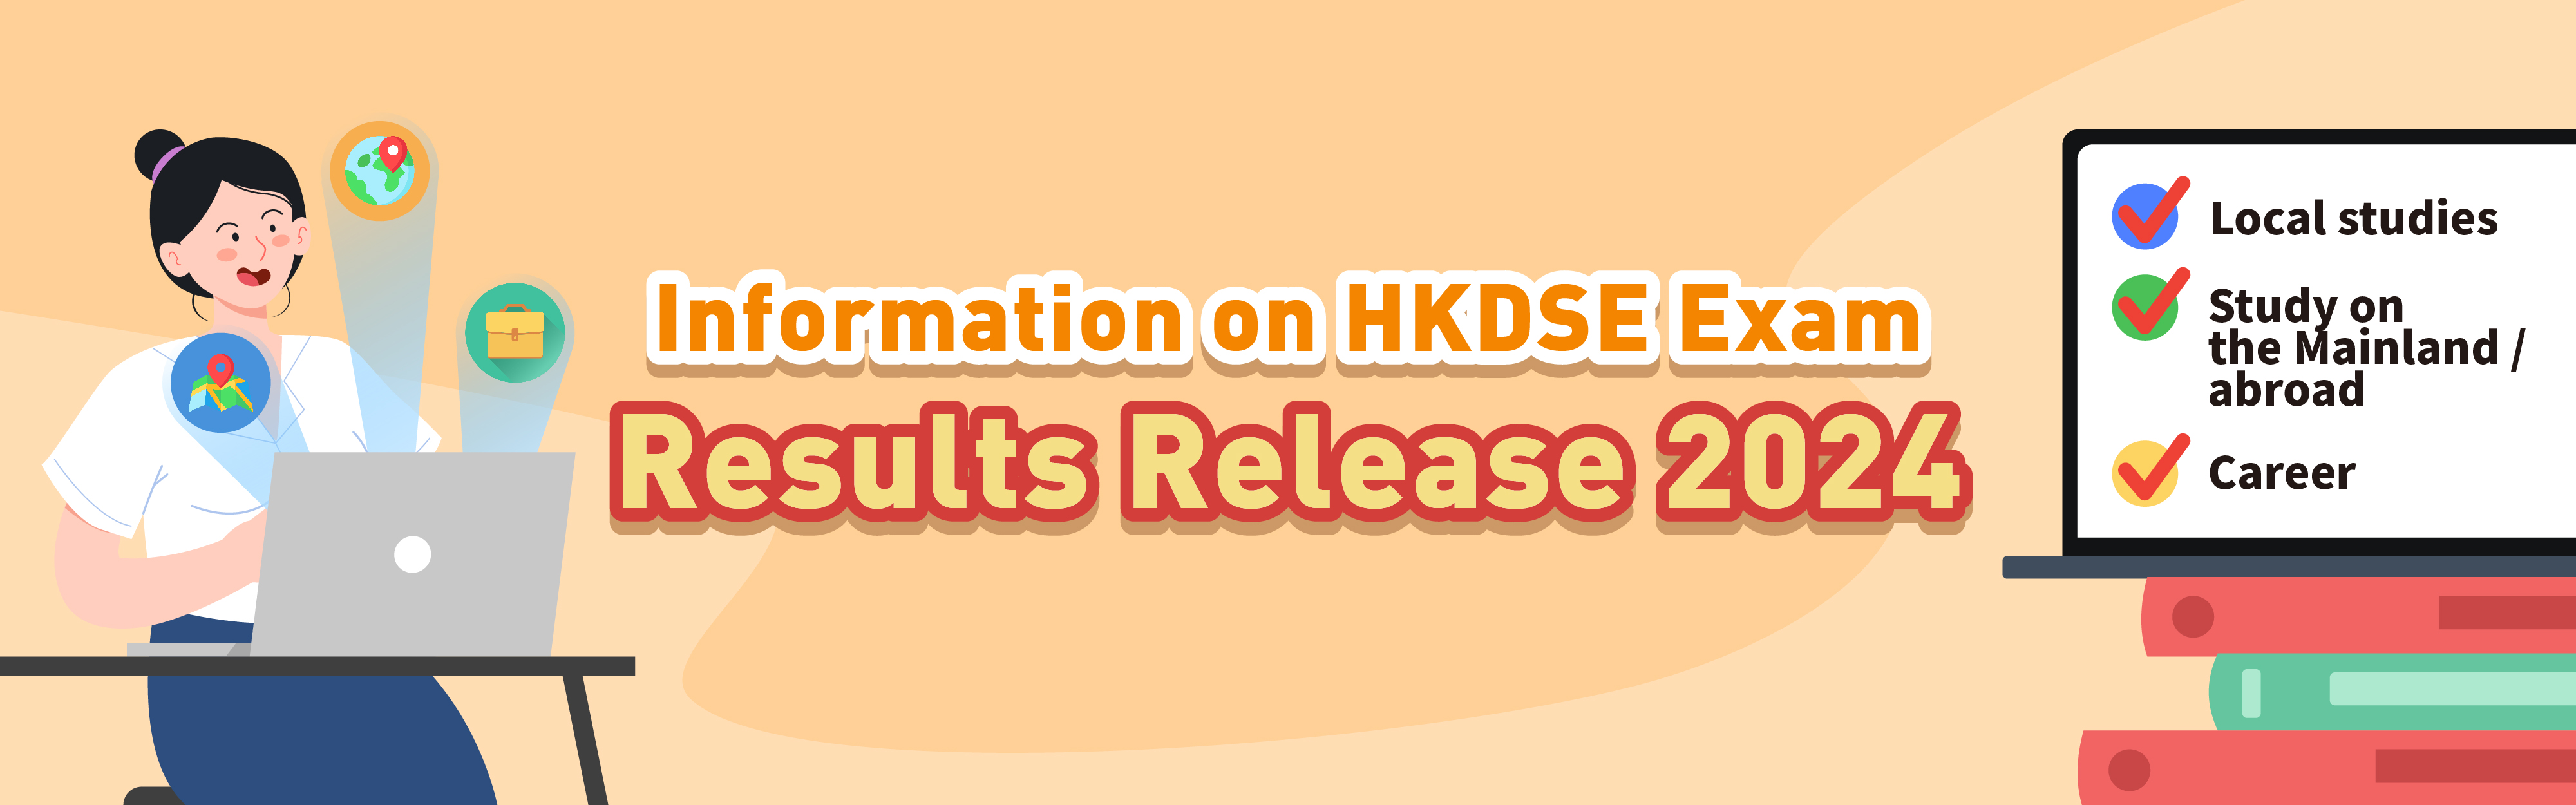 Information on HKDSE Exam Results Release 2024